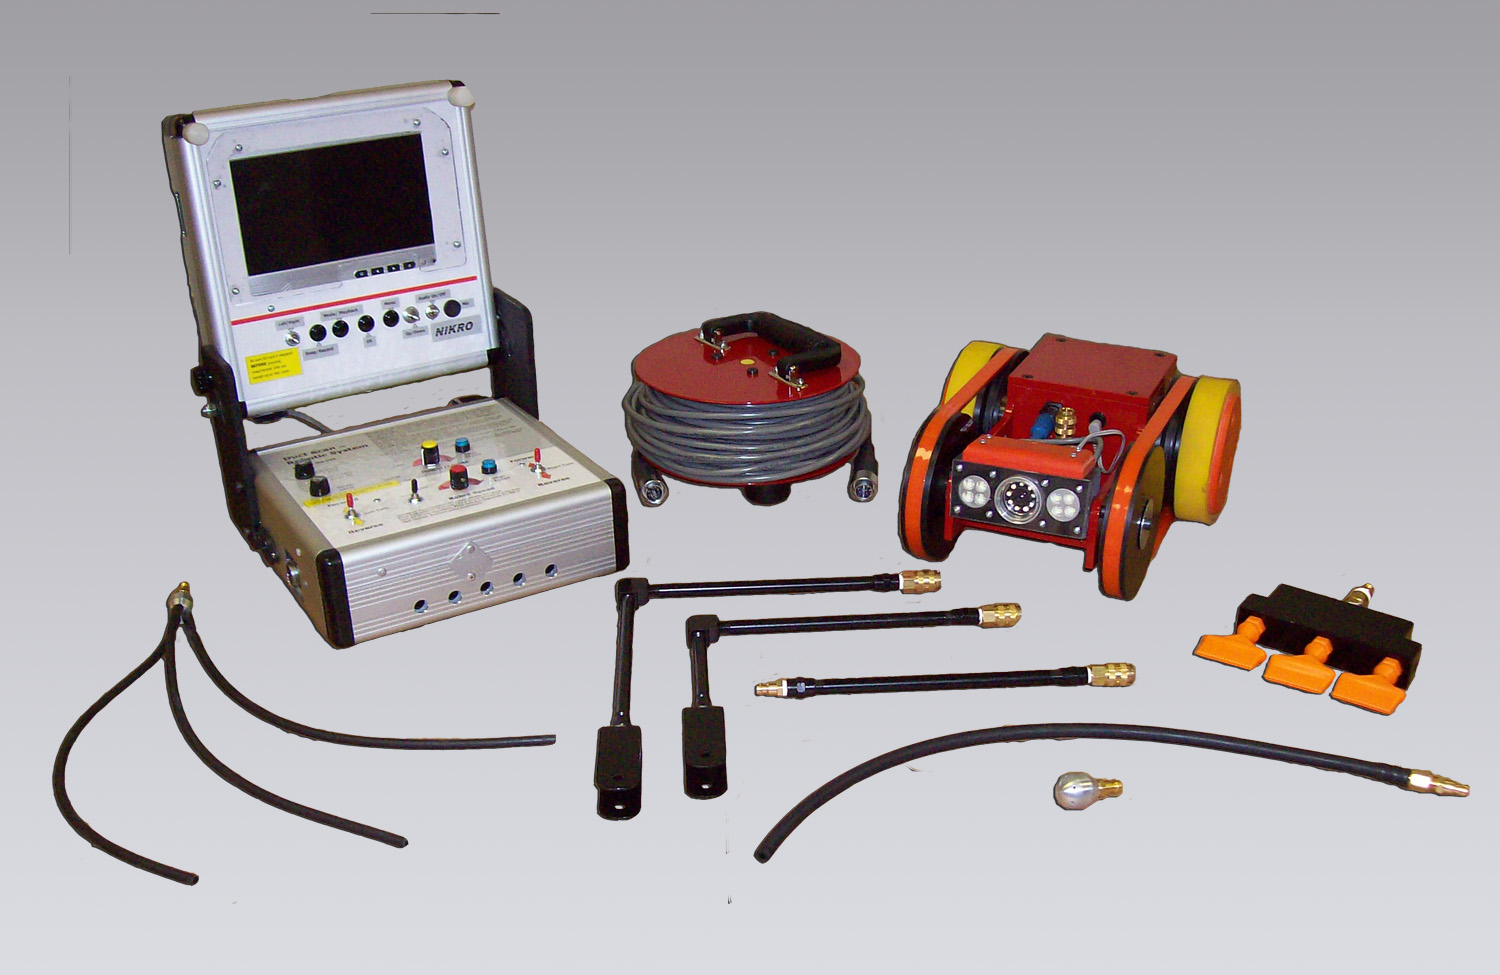 862117 - Robotic Inspection and Air Washing System - NIKRO Industries, Inc.